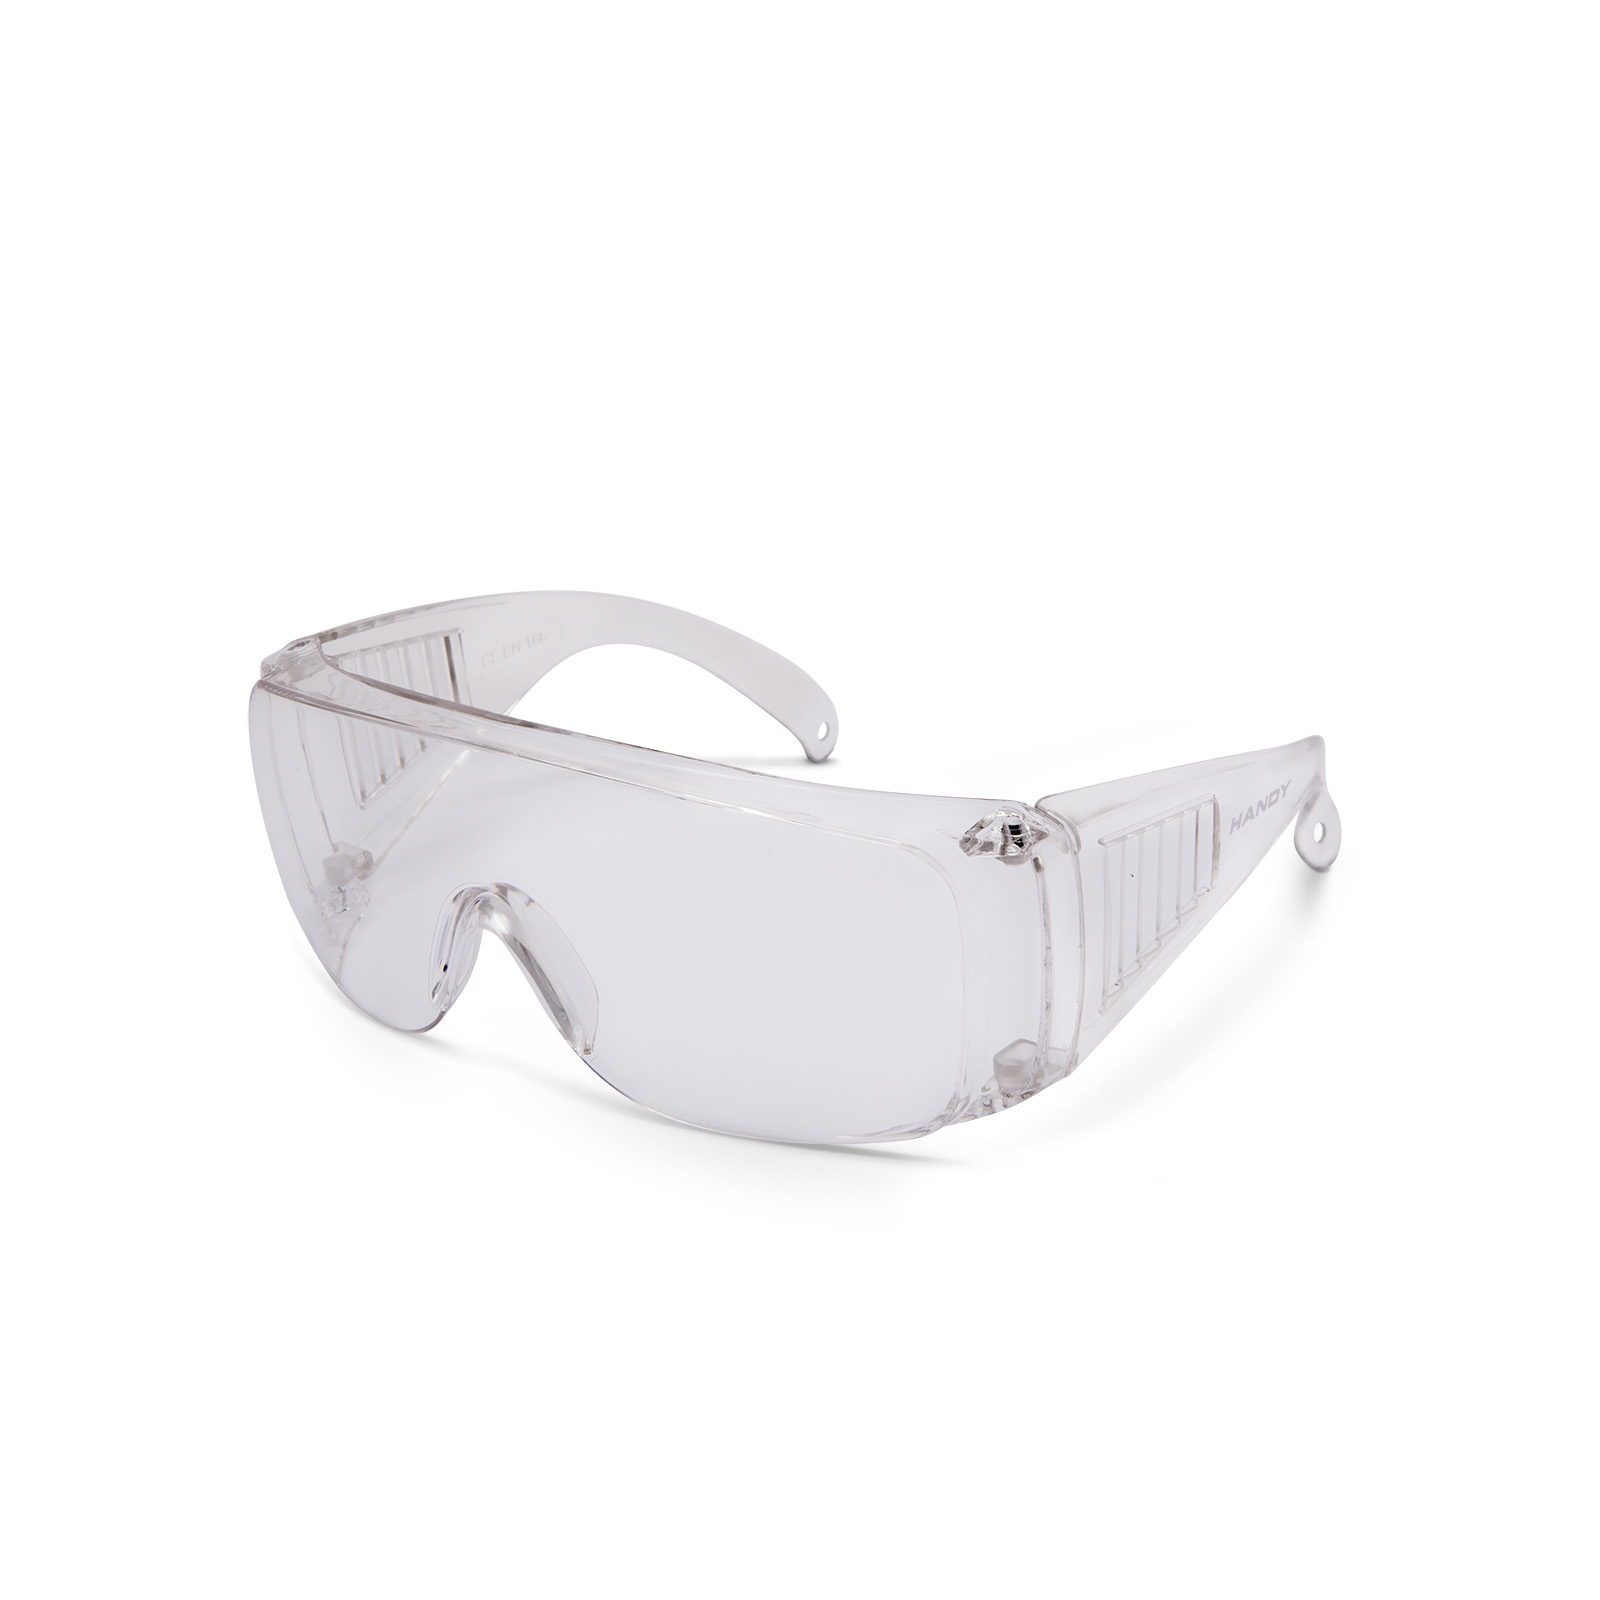 Professional Safety Eyewear with UV protection thumb